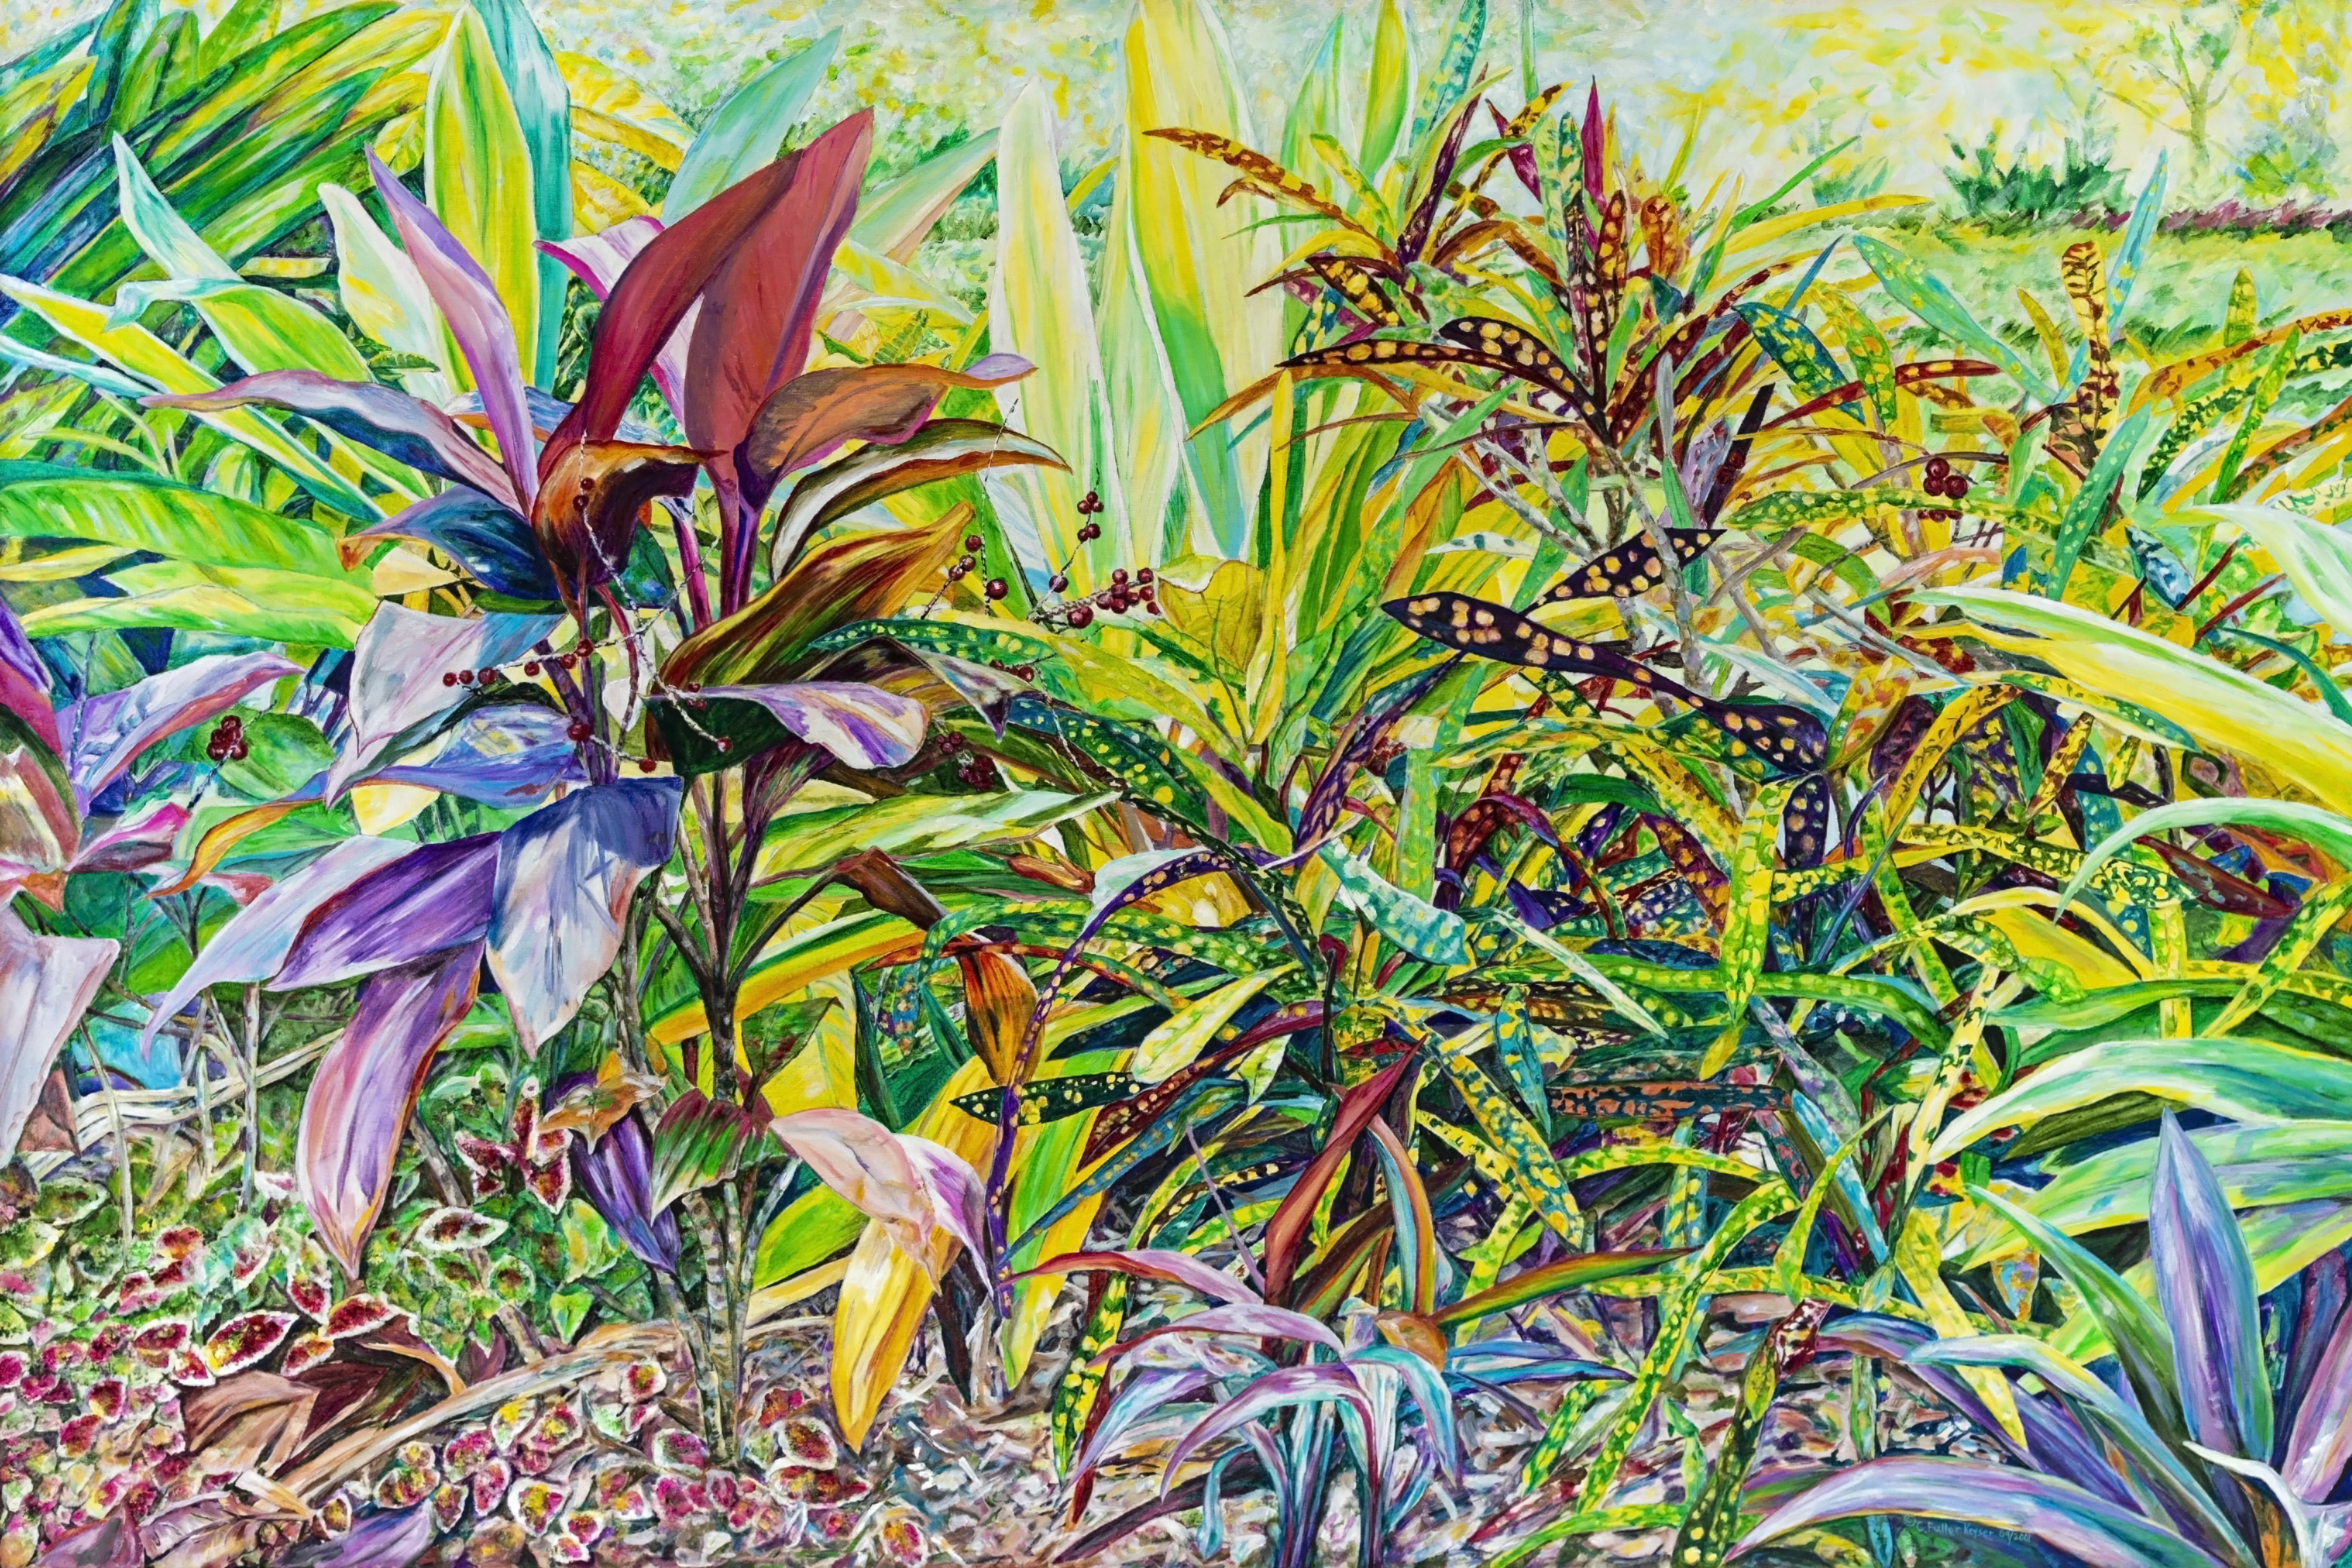 Caren Keyser, 'Ti Plant With Spotted Crotons', 2002, original Painting Acrylic, 60 x 40  x 2 cm. Artwork description: 3891 This garden scene overflows with colors.  Tropical Ti plants nestle among the slender leaves of colorful spotted Crotons. ...